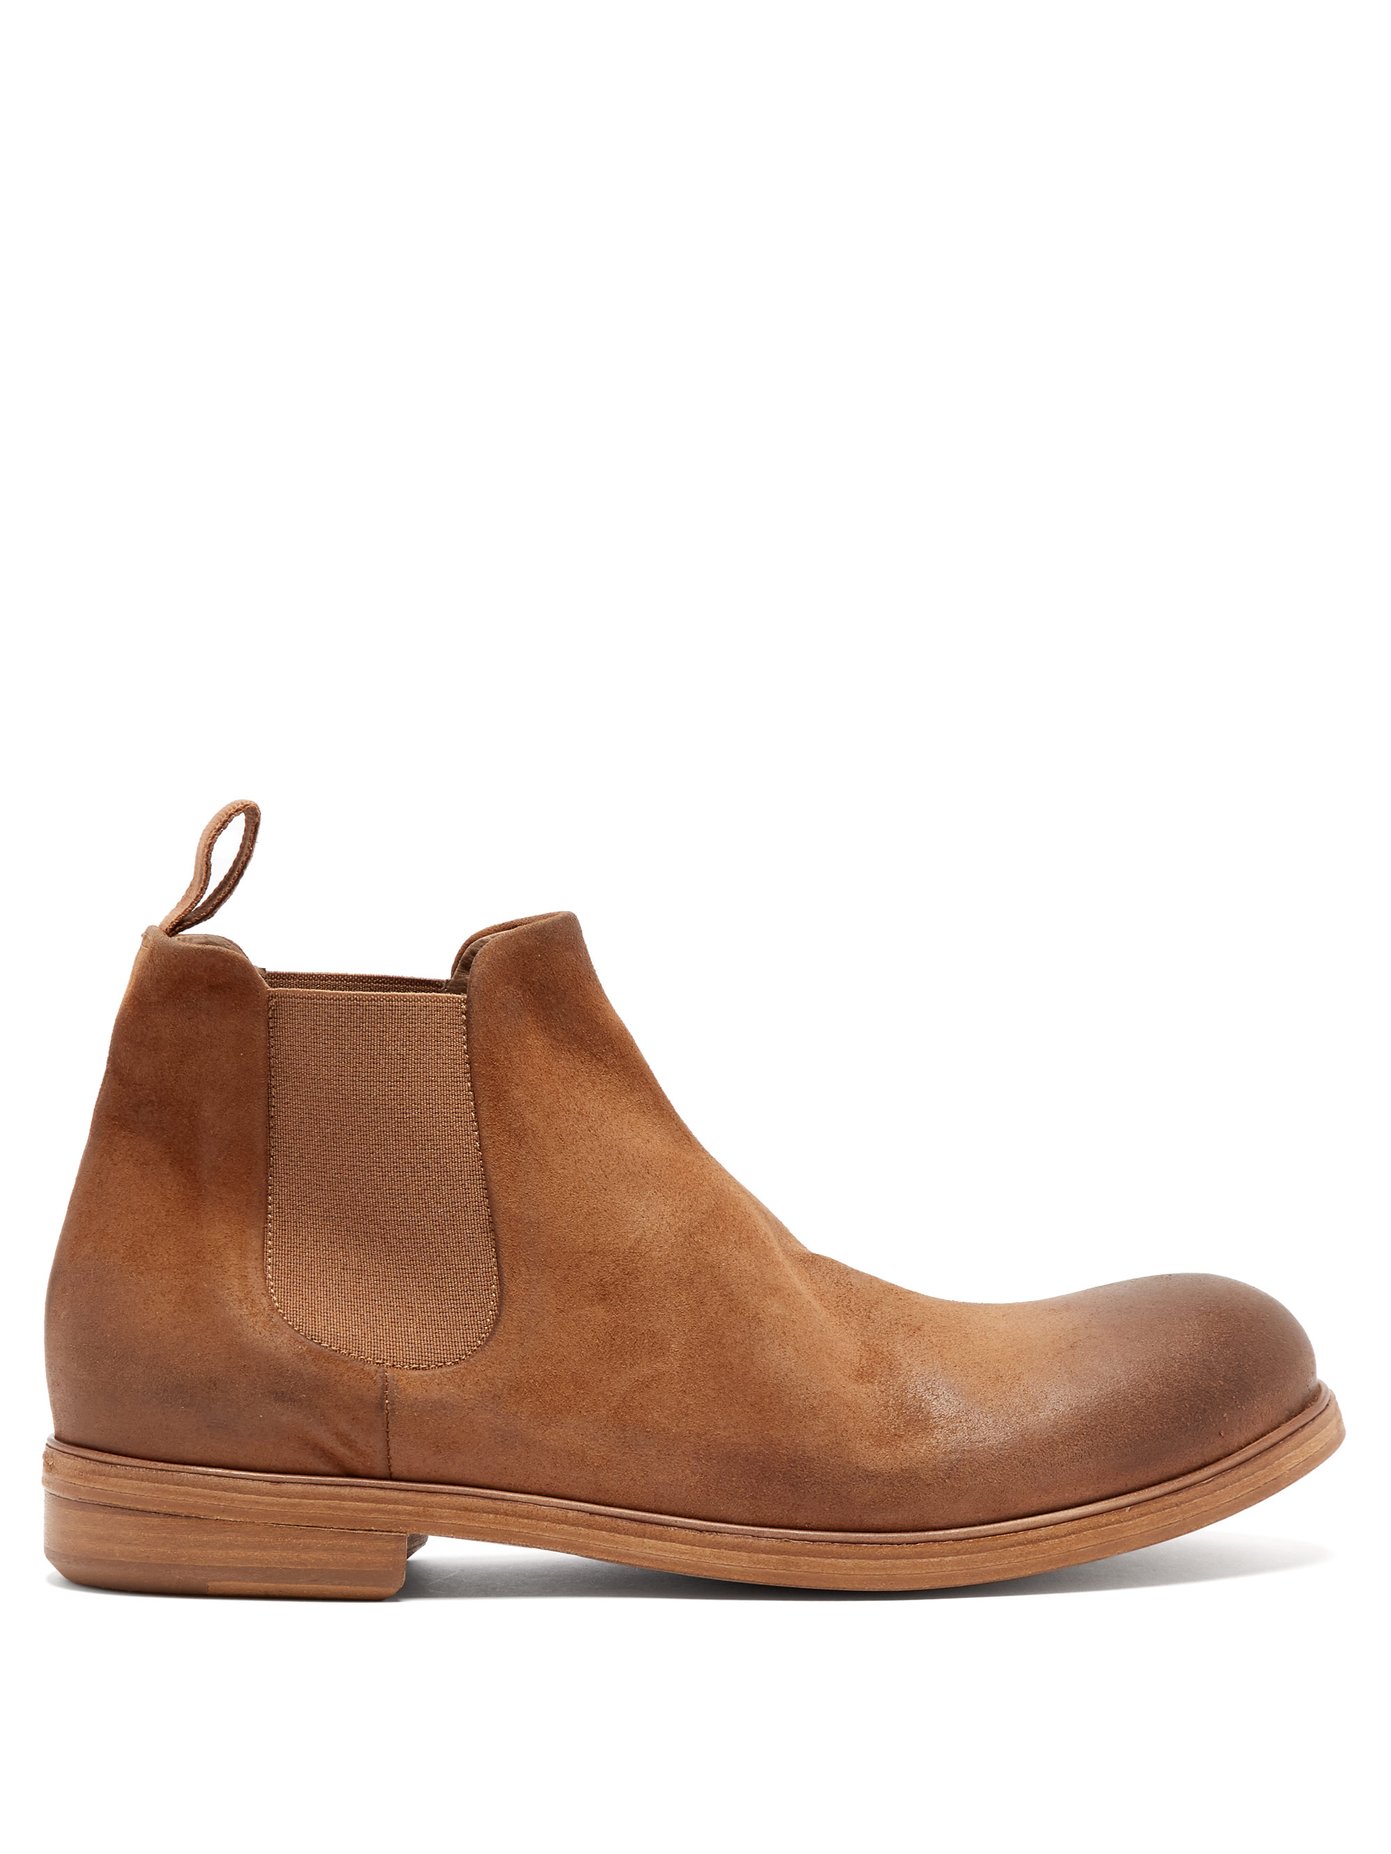 chelsea boots next day delivery